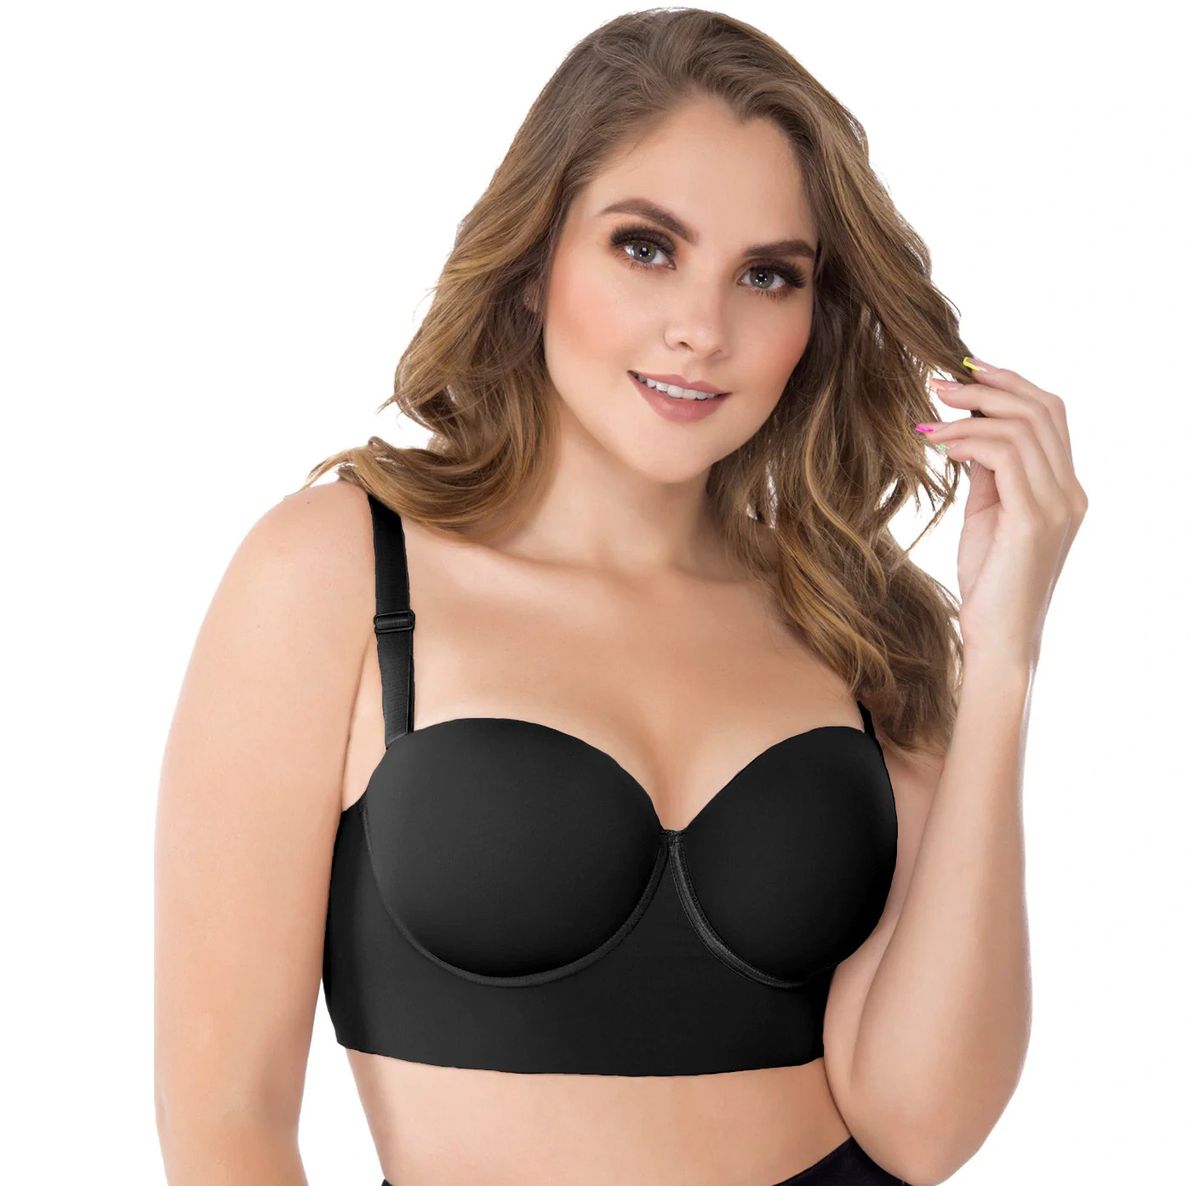 UPLADY 8034 FIRM CONTROL STRAPLESS BRA FOR WOMEN (Size: 36C/L